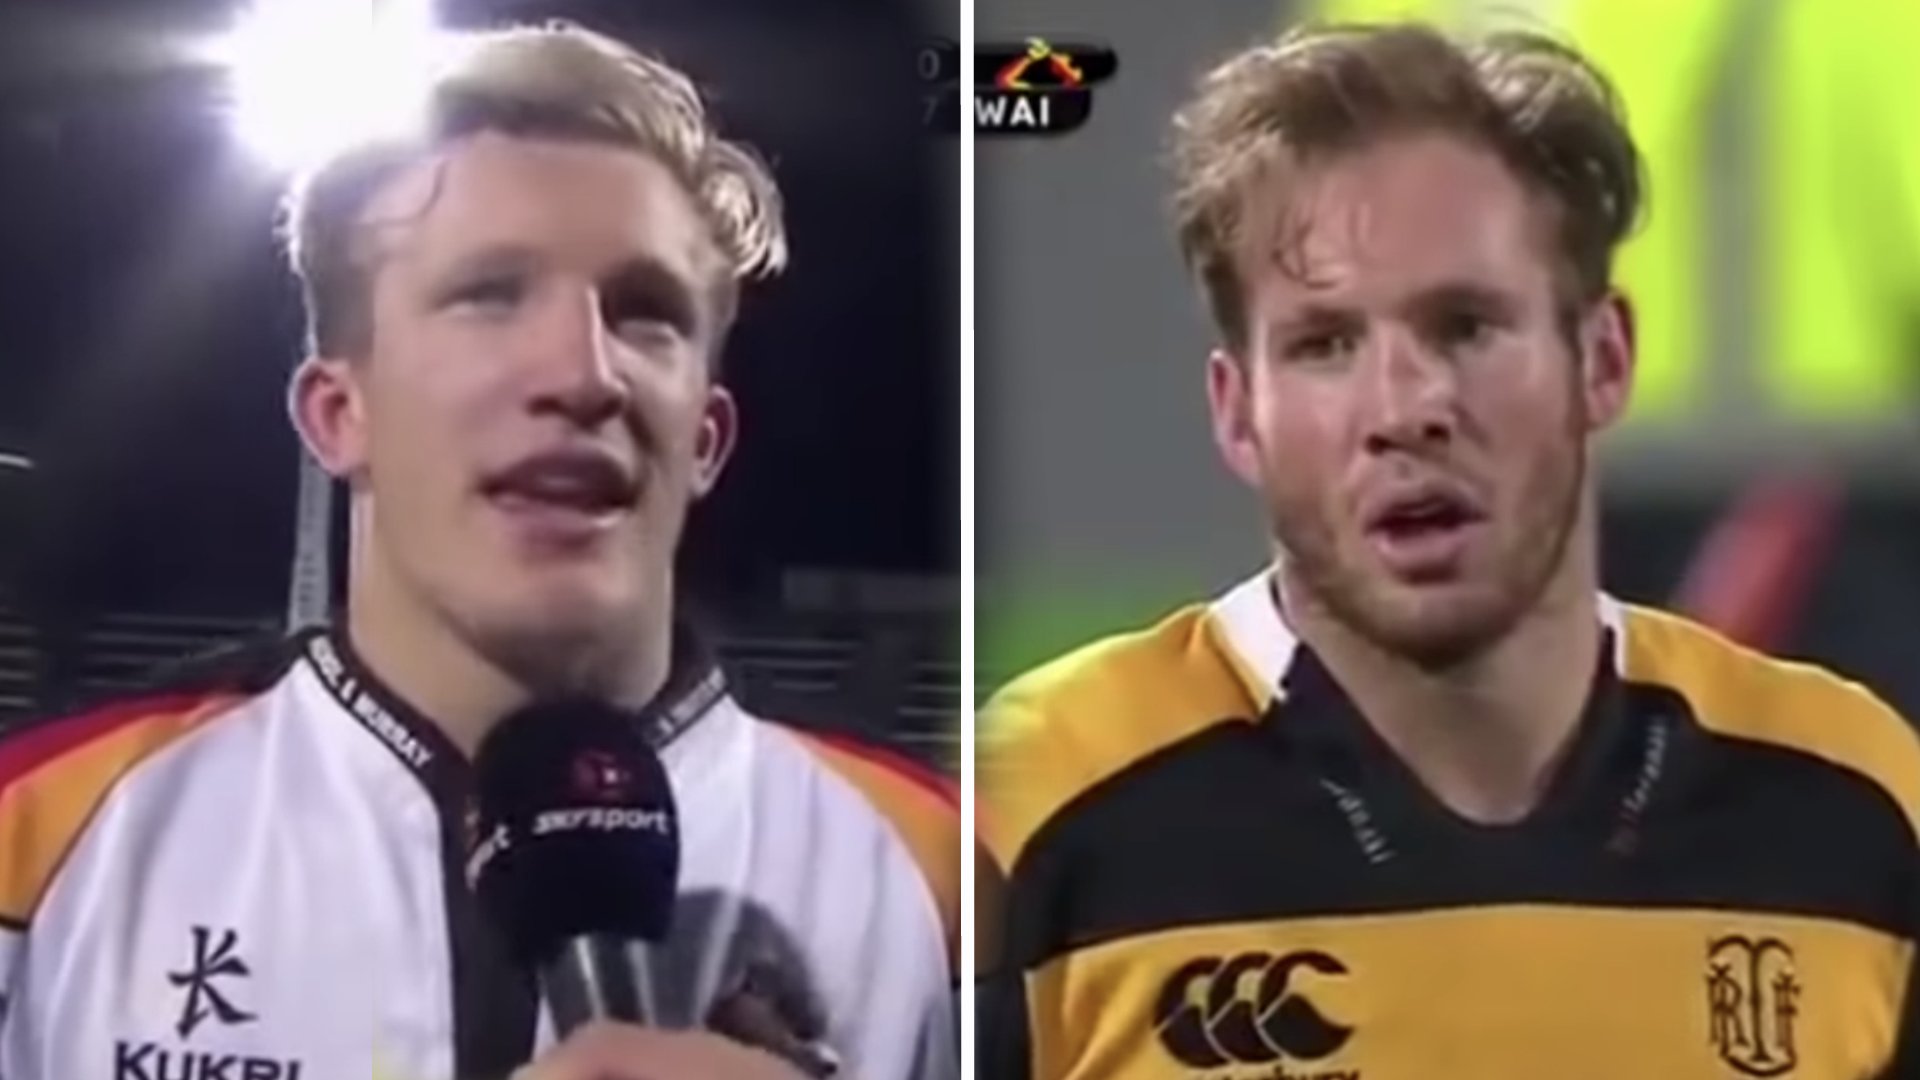 WATCH: A HILARIOUS compilation has been made on the time that the McKenzie brothers played each other in the Mitre Cup